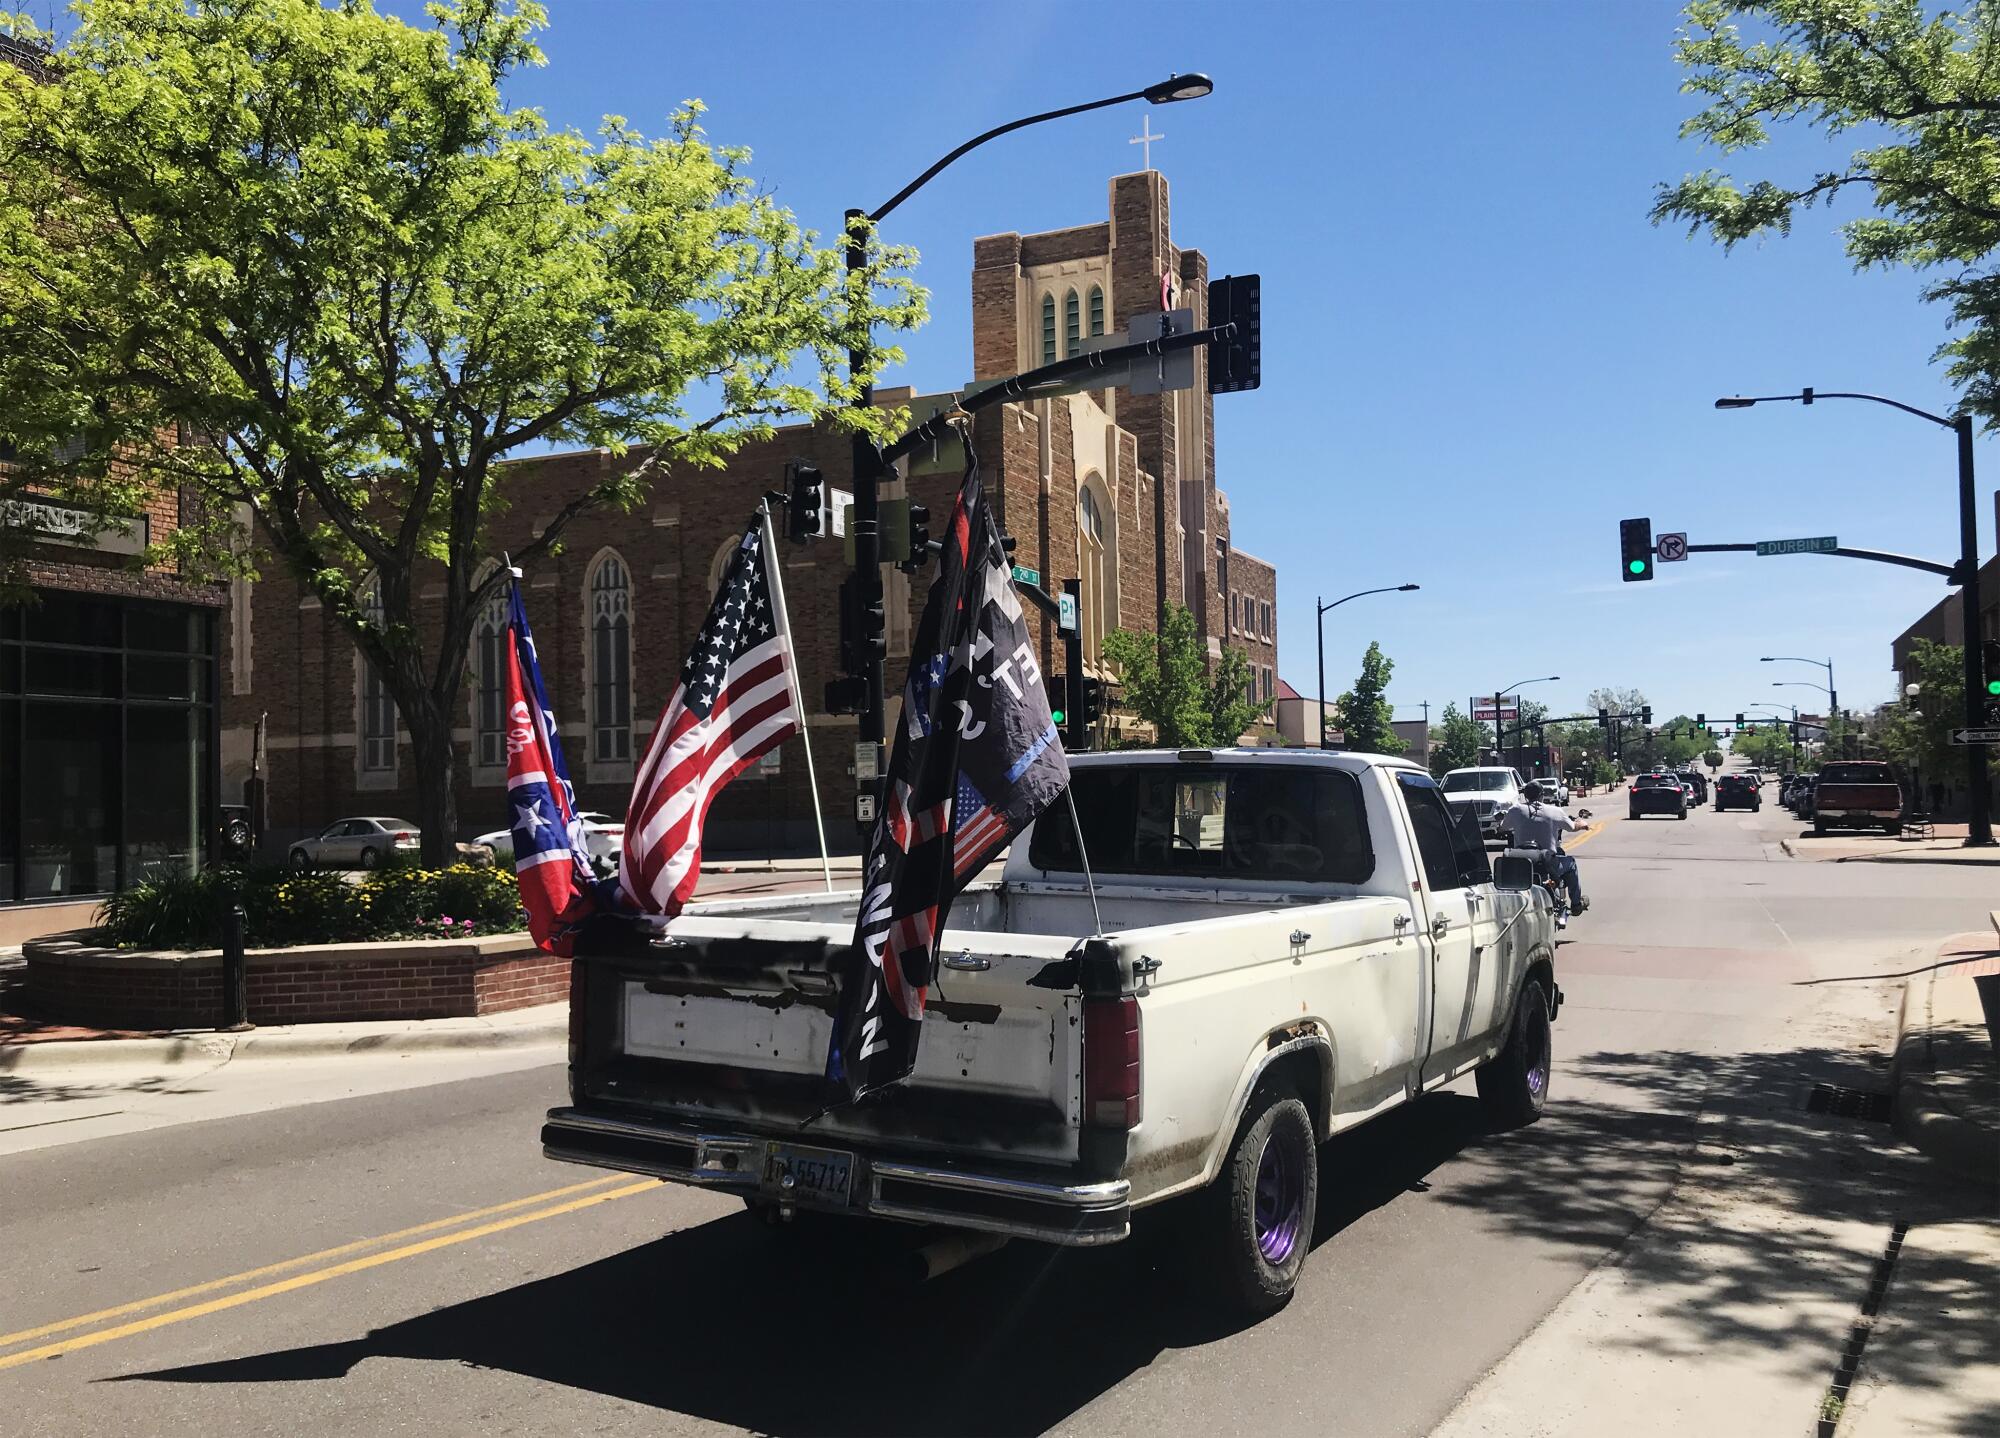 A truck drives through a downtown street with flags on the back